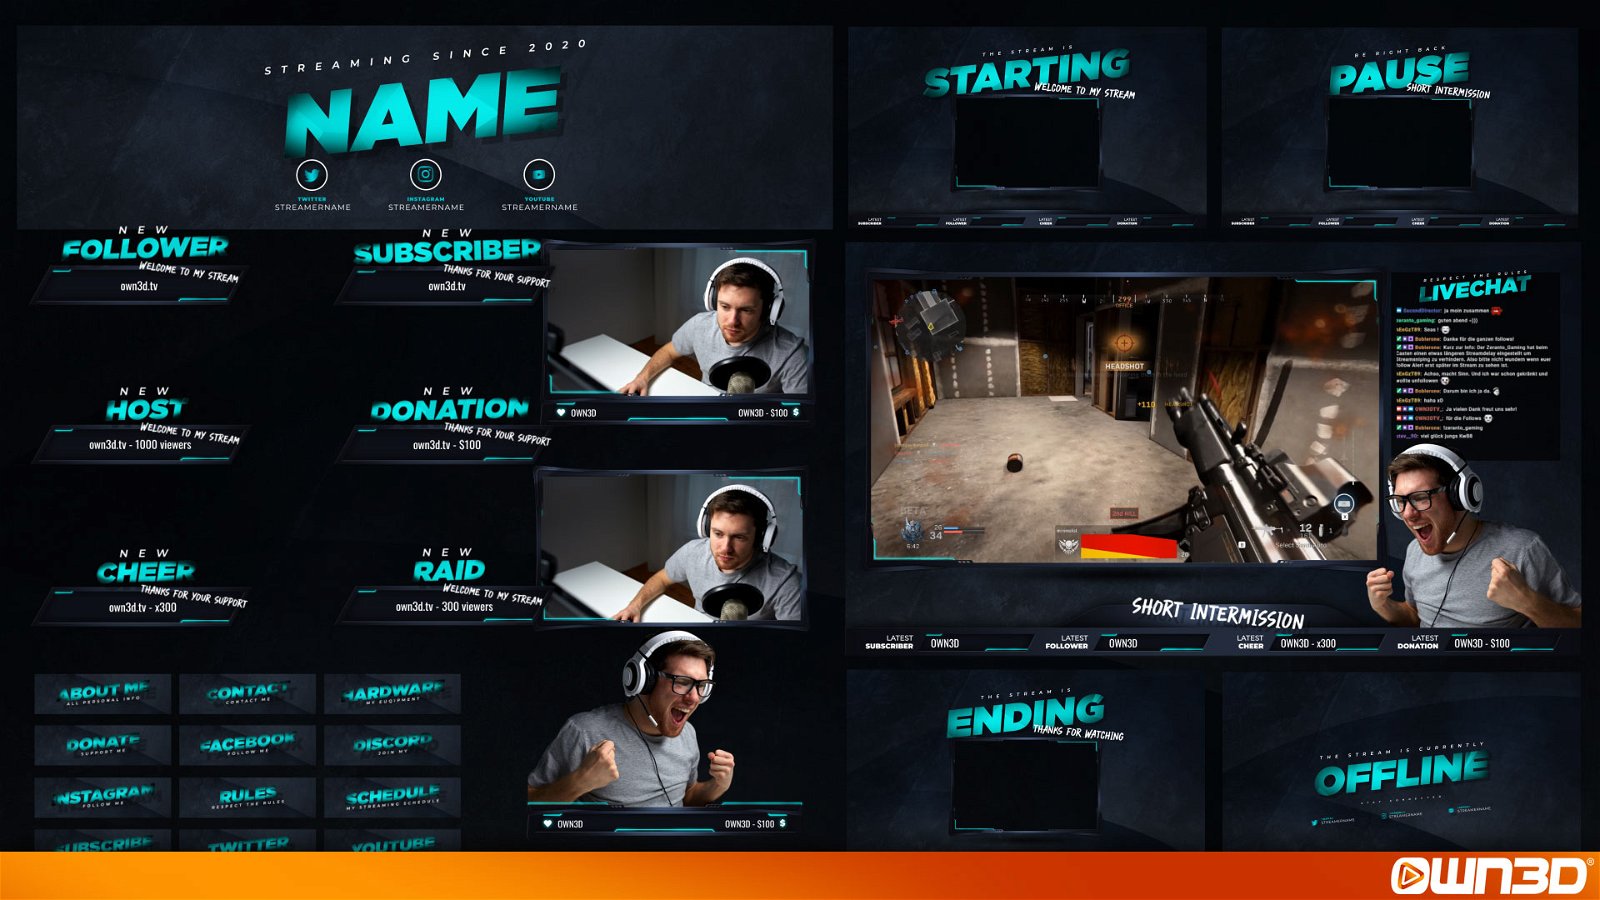 Twitch.Tv designs, themes, templates and downloadable graphic